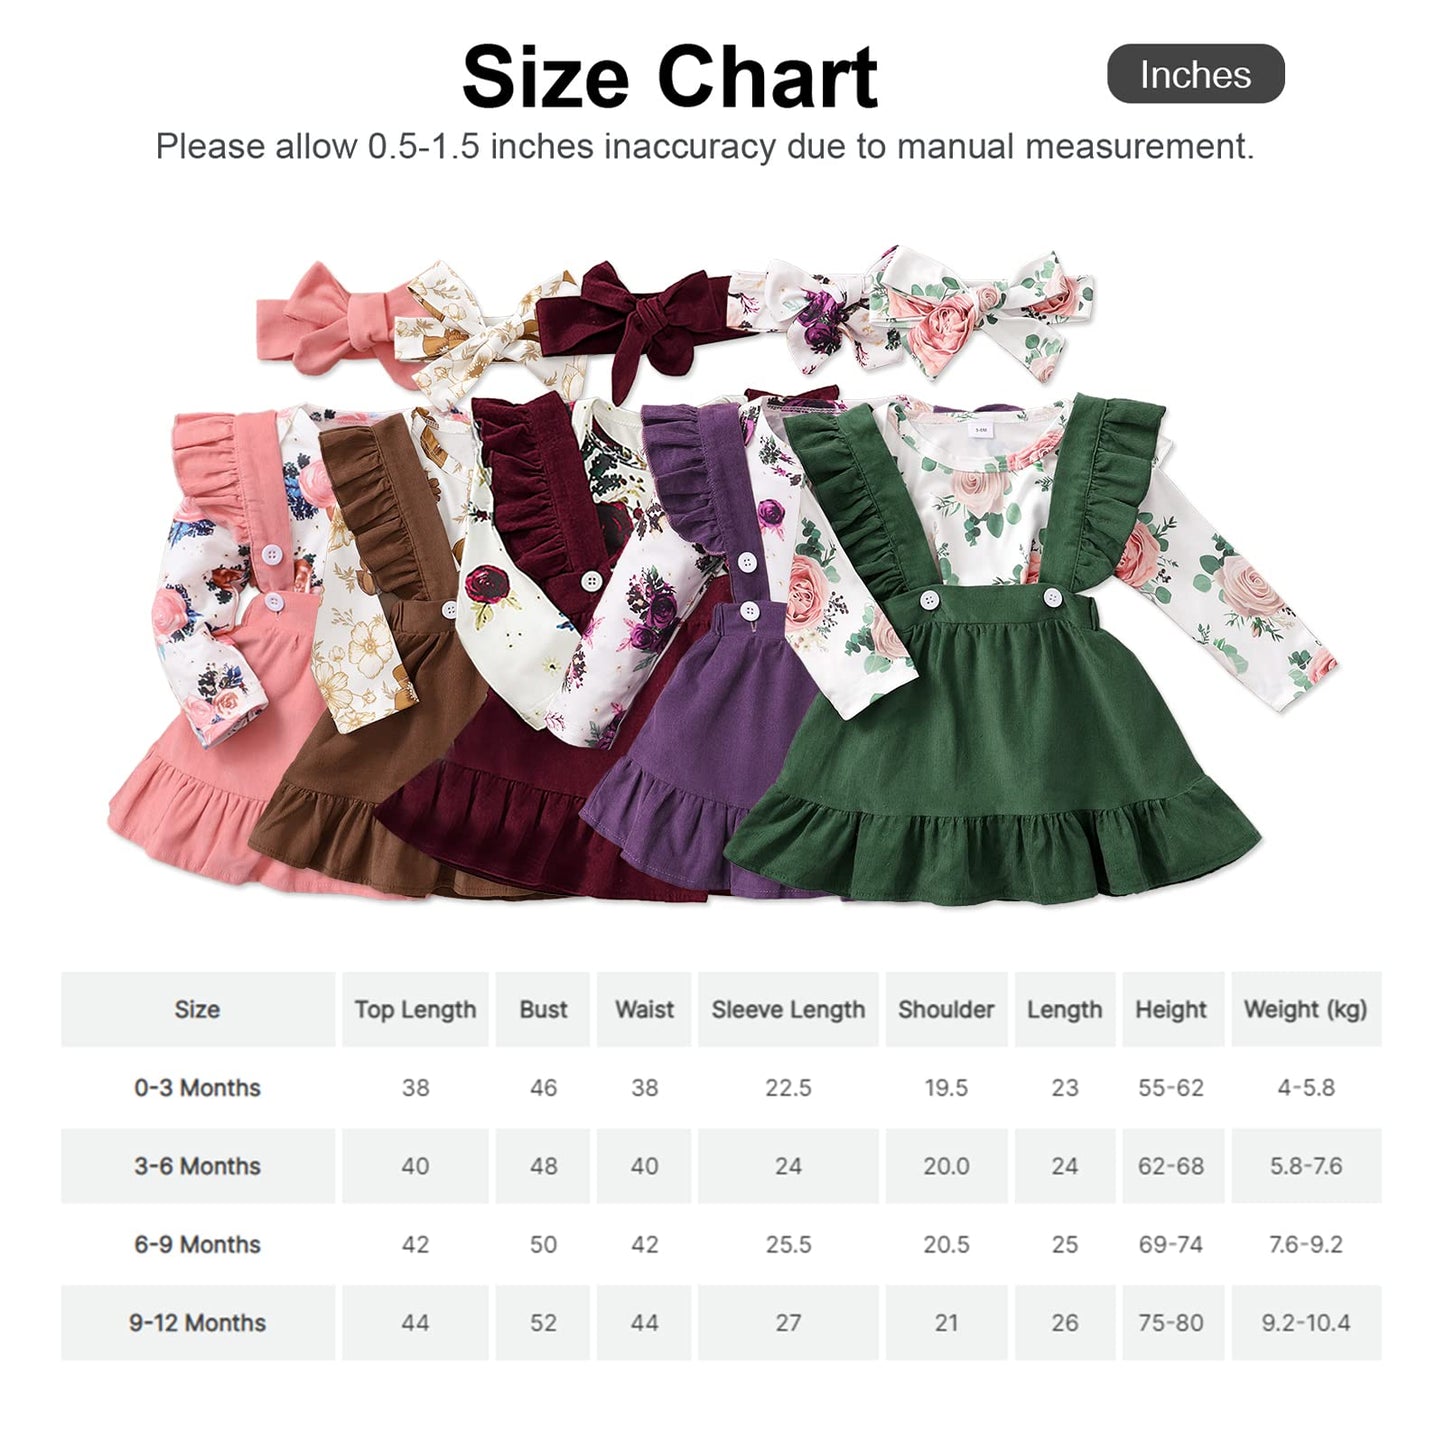 PATPAT Newborn Infant Baby Girl Clothes Outfit Long Sleeve Romper Top Overall Dress Suspender Skirt Set, for 0-3 Months